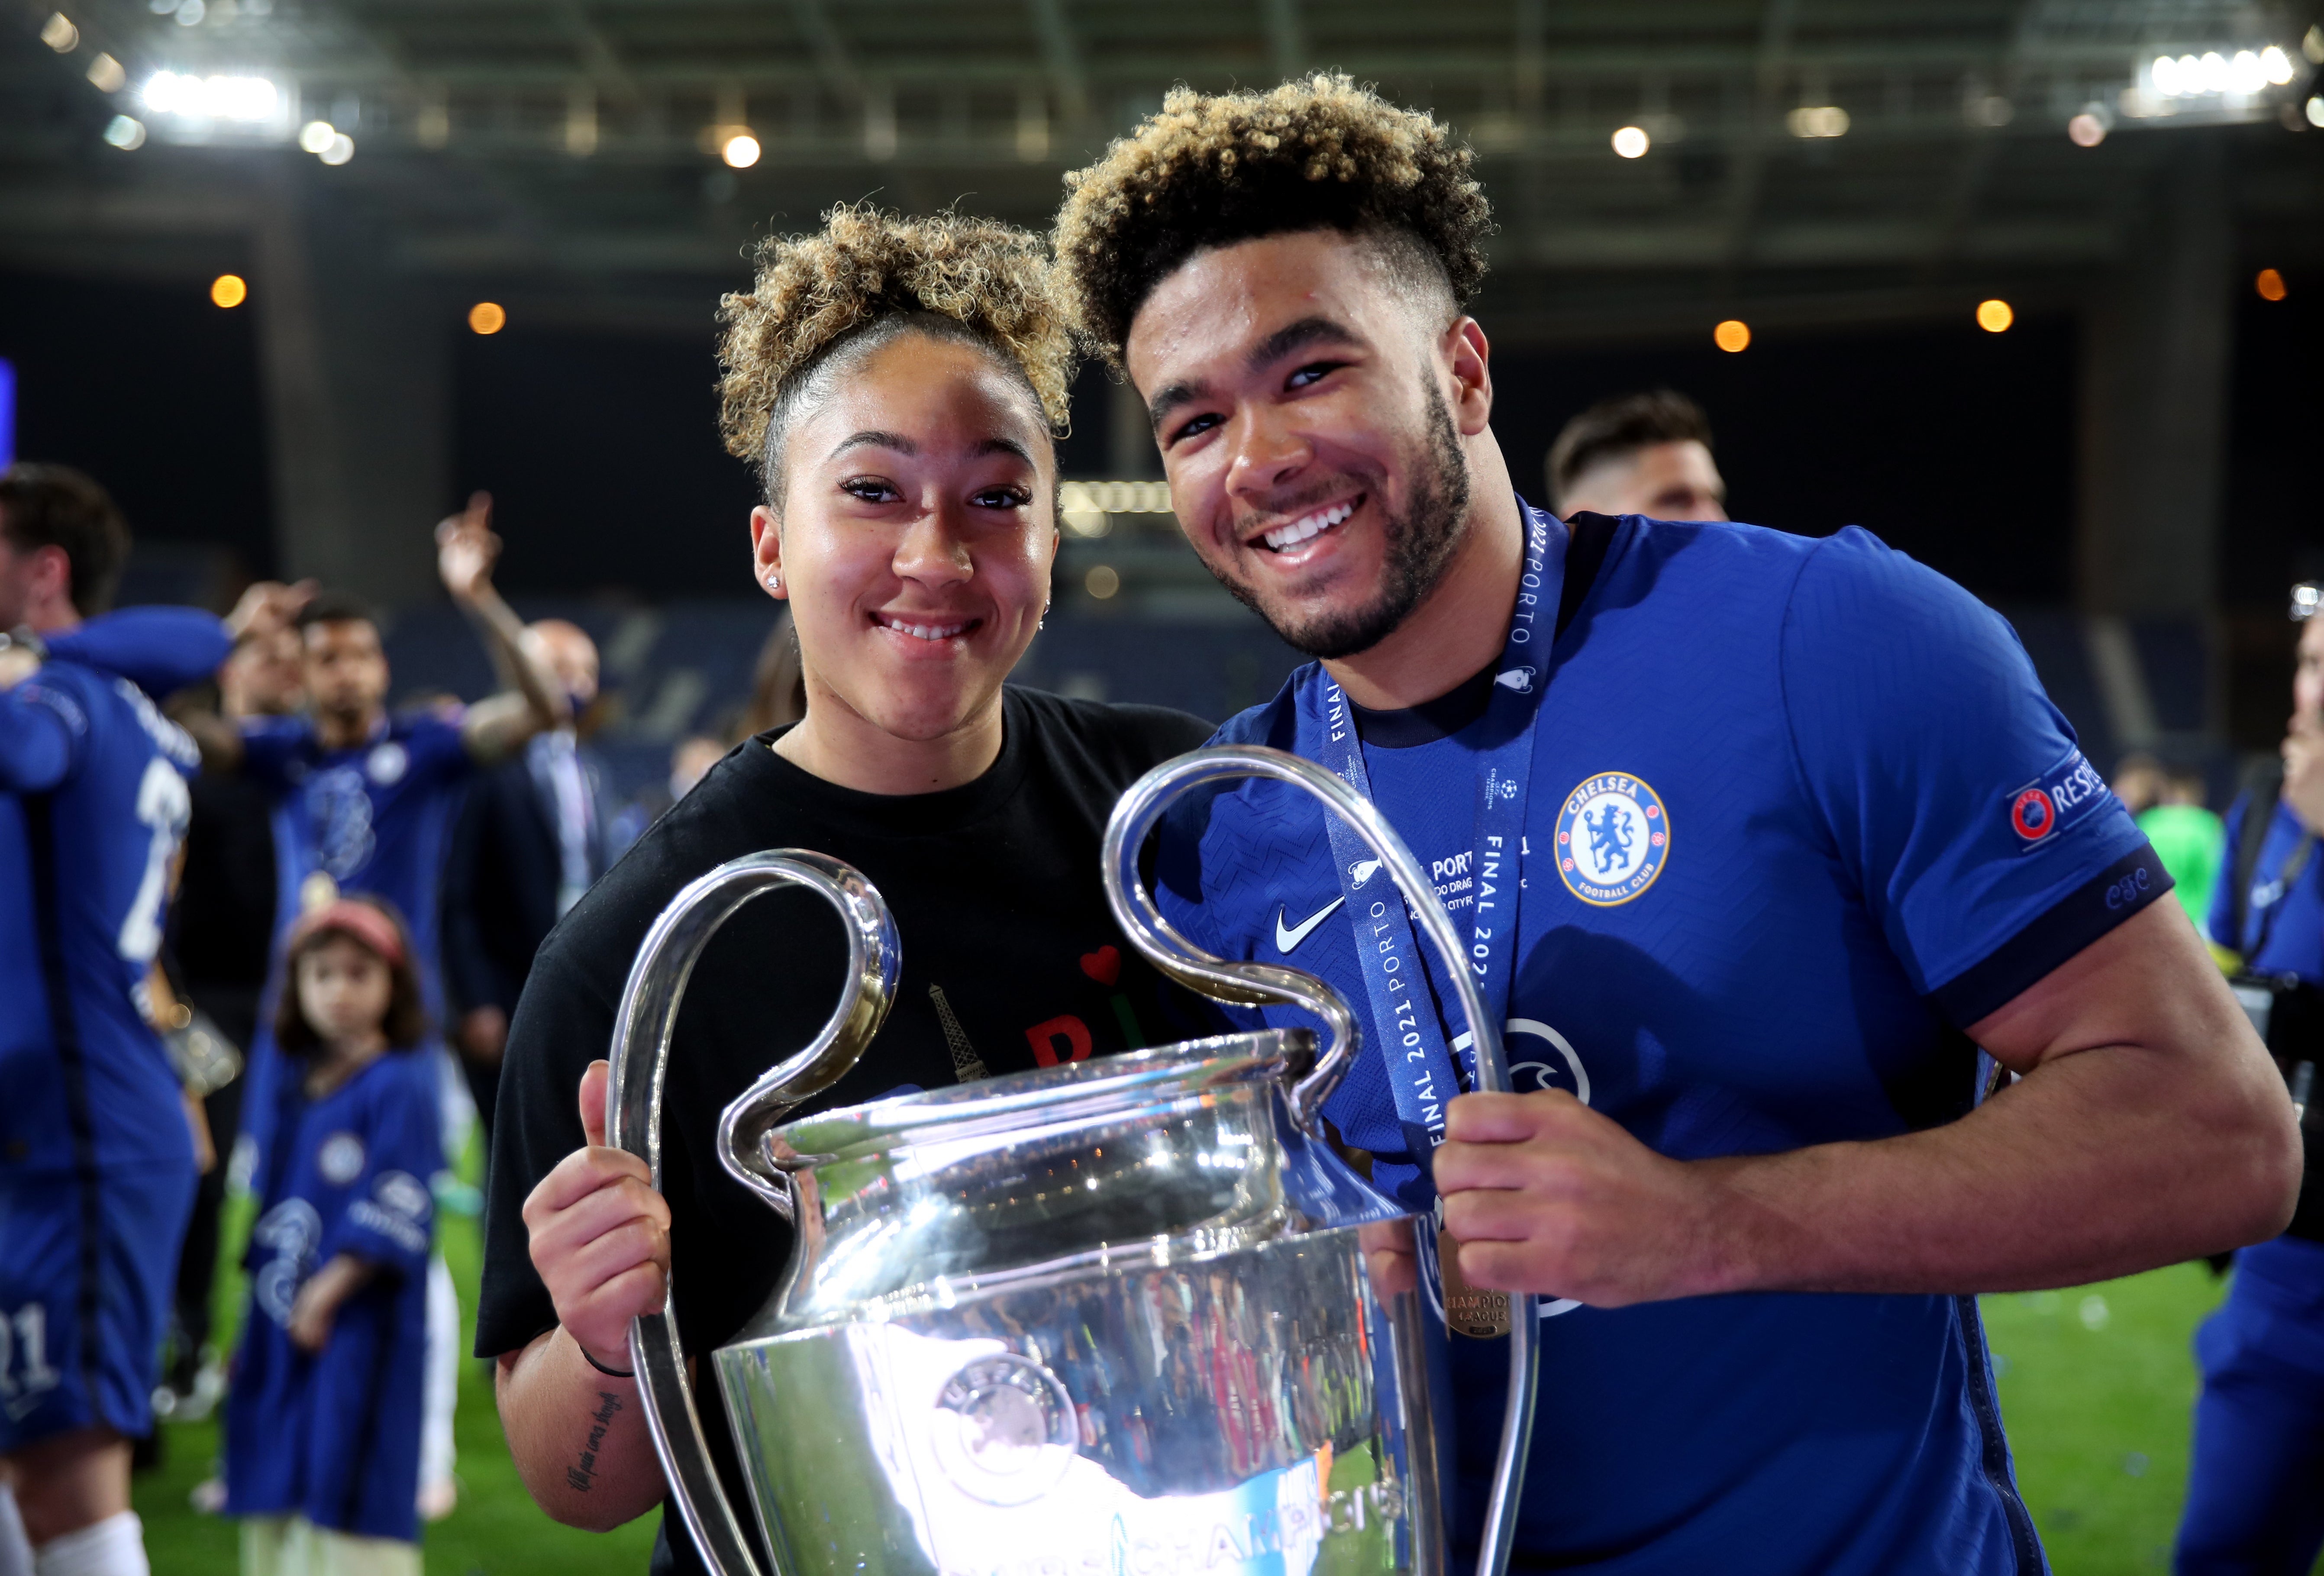 Reece James, right, with sister Lauren, left, after the Chelsea men’s team’s Champions League triumph over Manchester City in Porto in May 2021 (Nick Potts/PA)